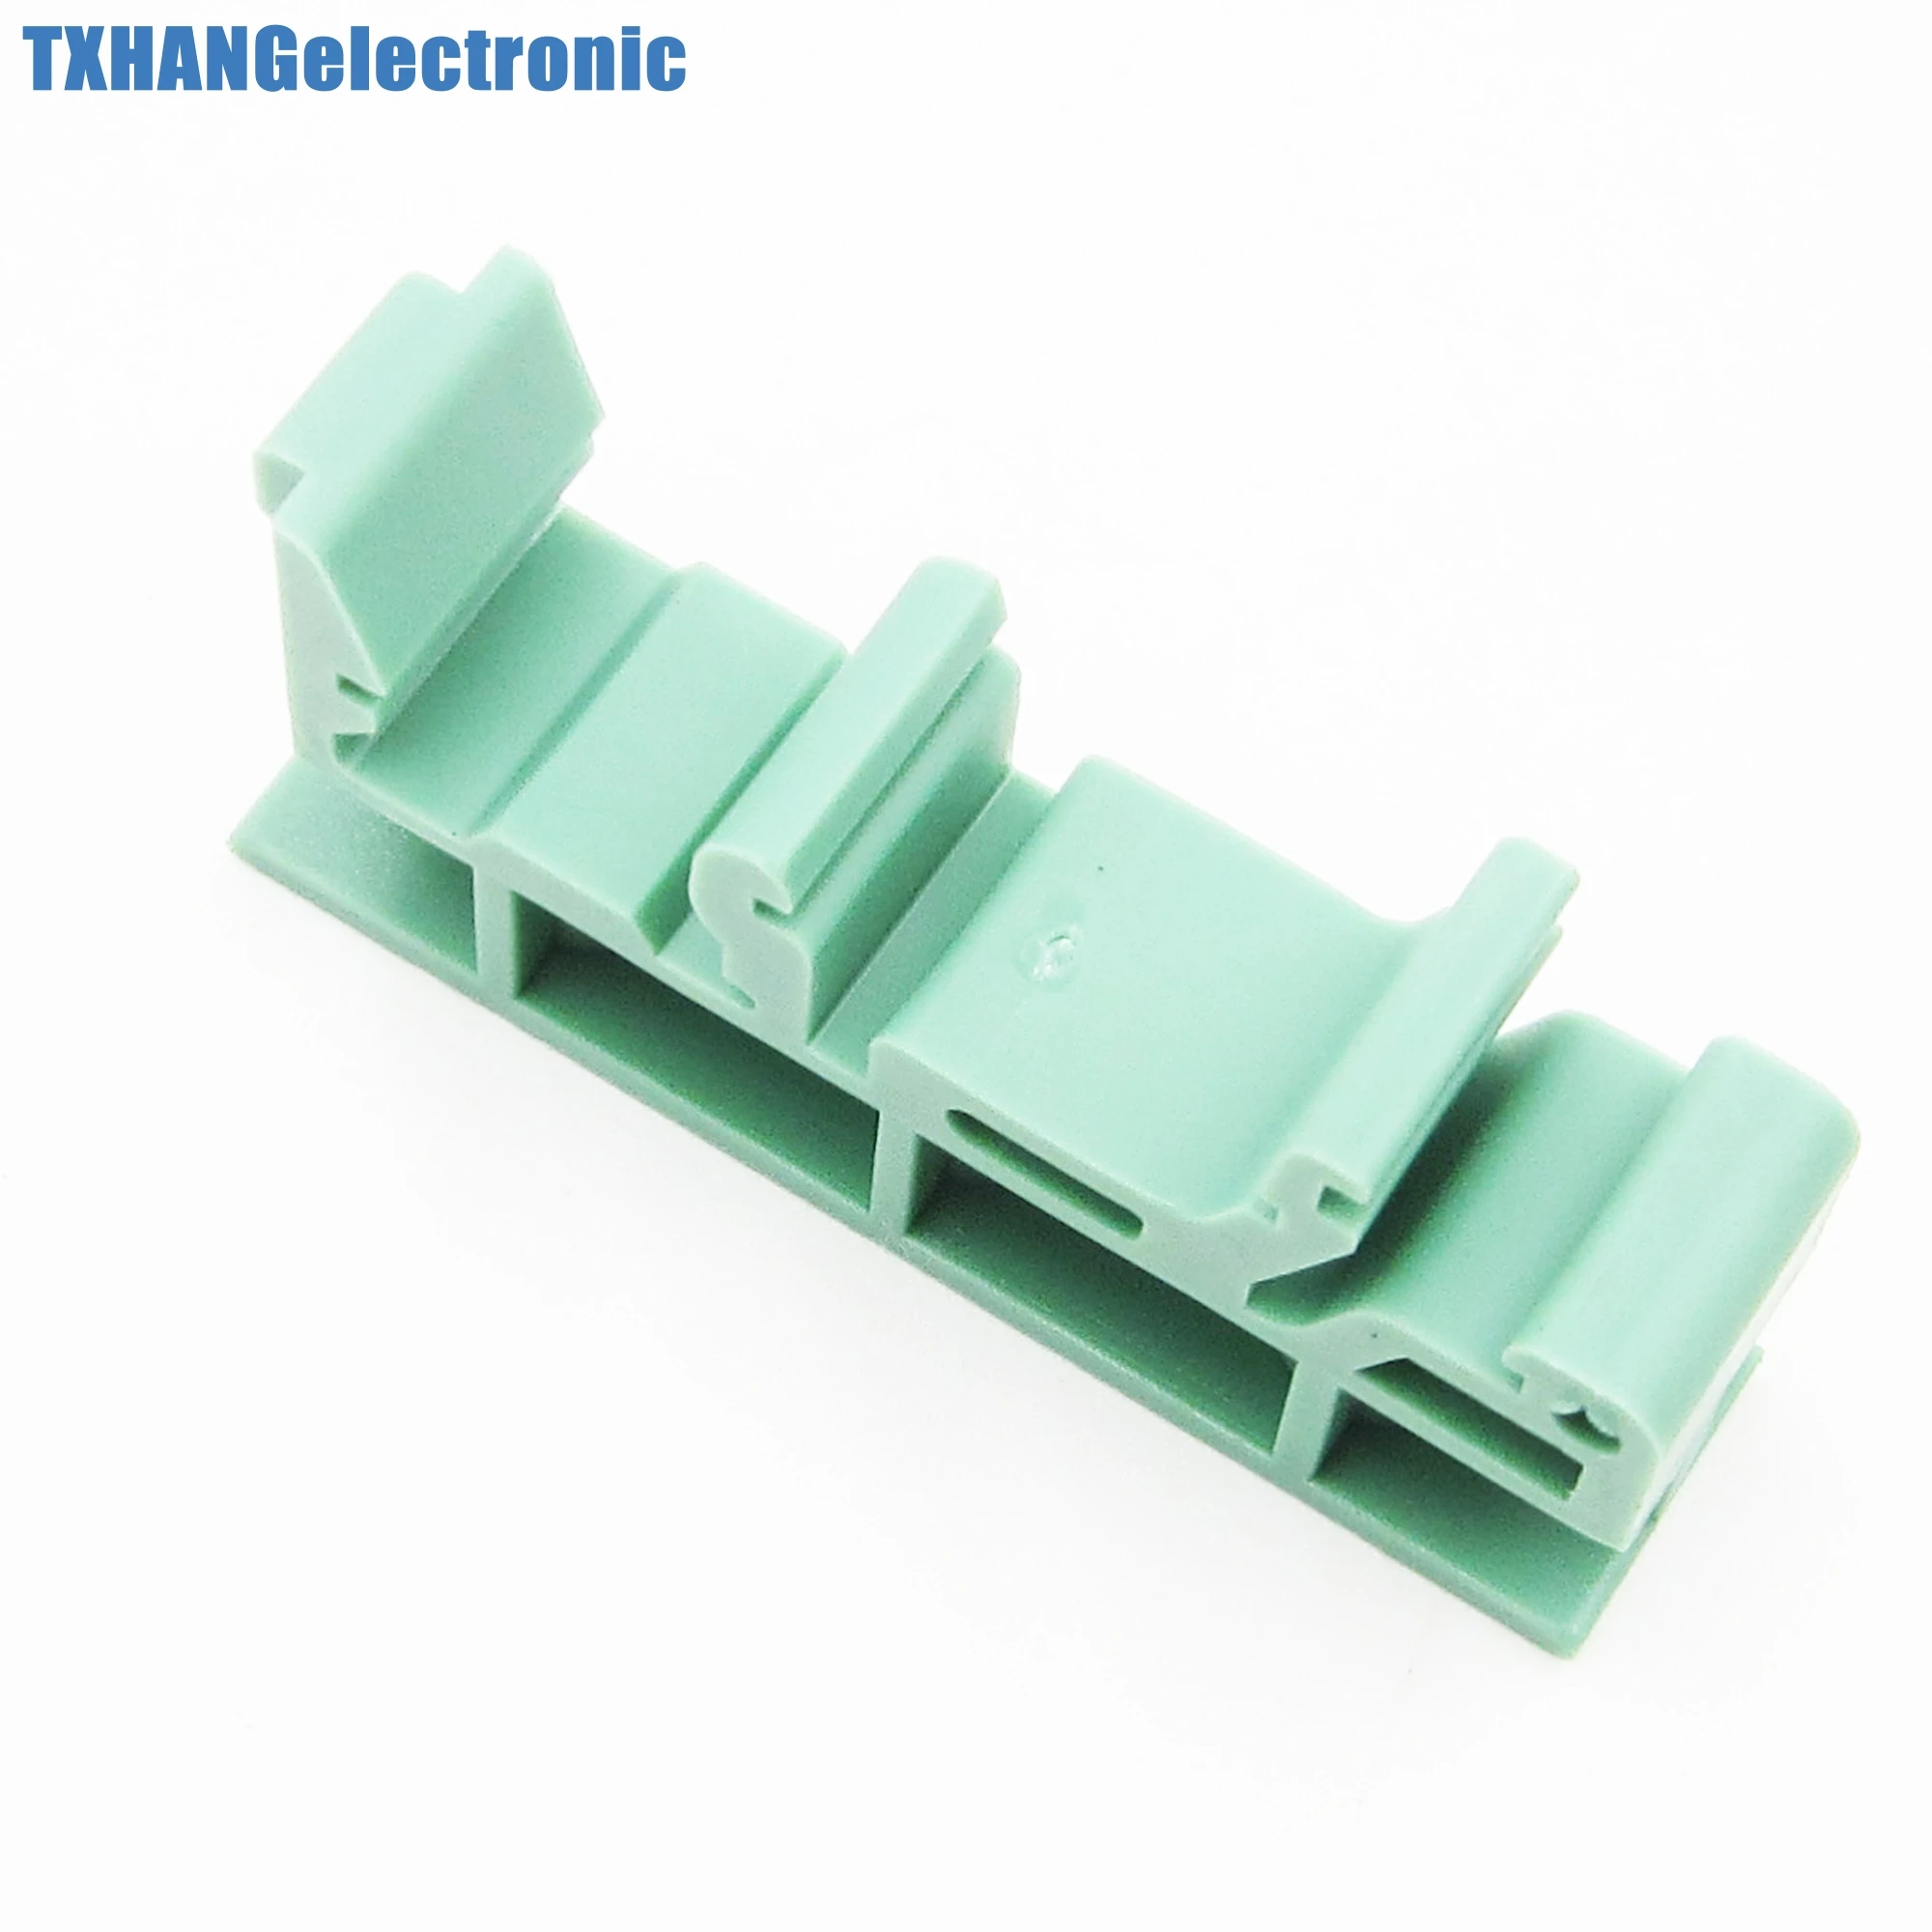 PCB Din C45 Rail Adapter Circuit Board Mounting Bracket Holders Carrier 35mm